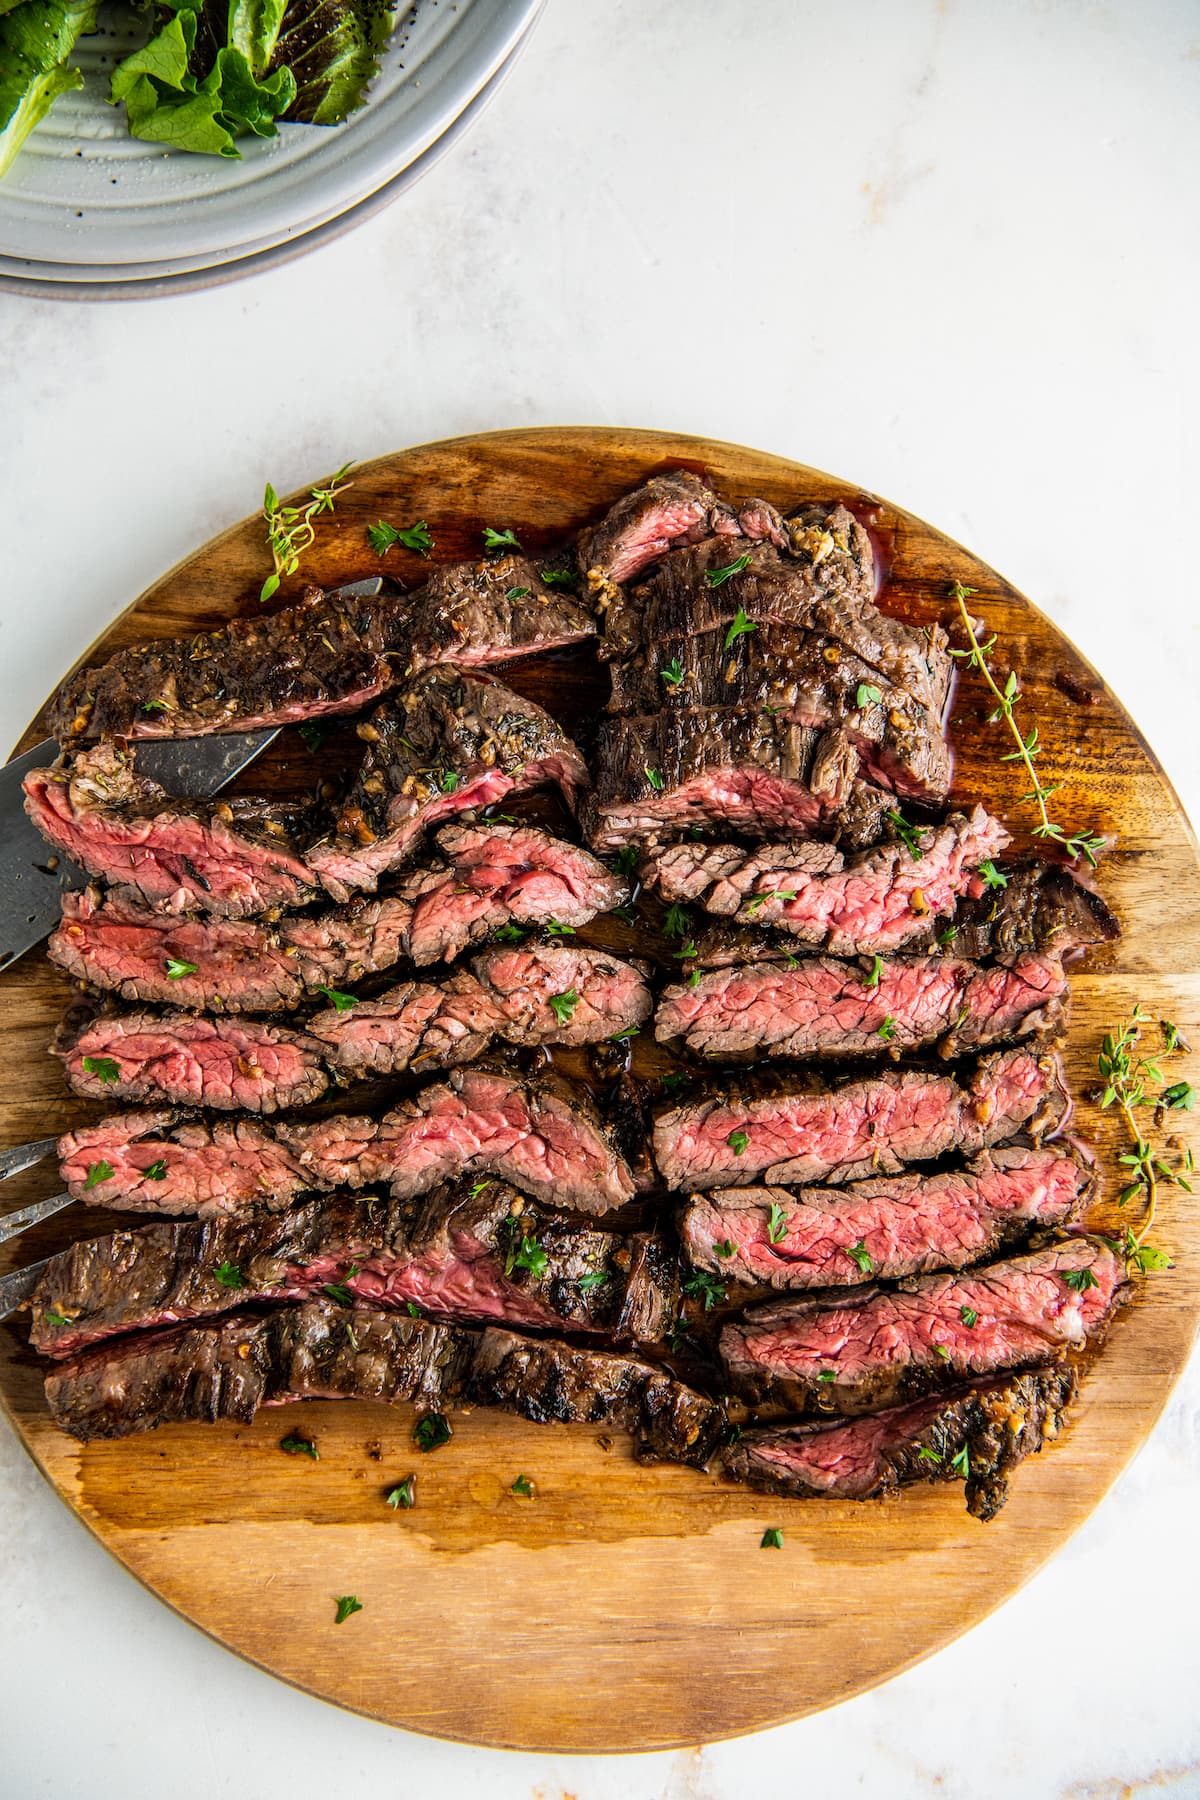 Overhead view of skirt steak resting on a cutting board, cut into slices